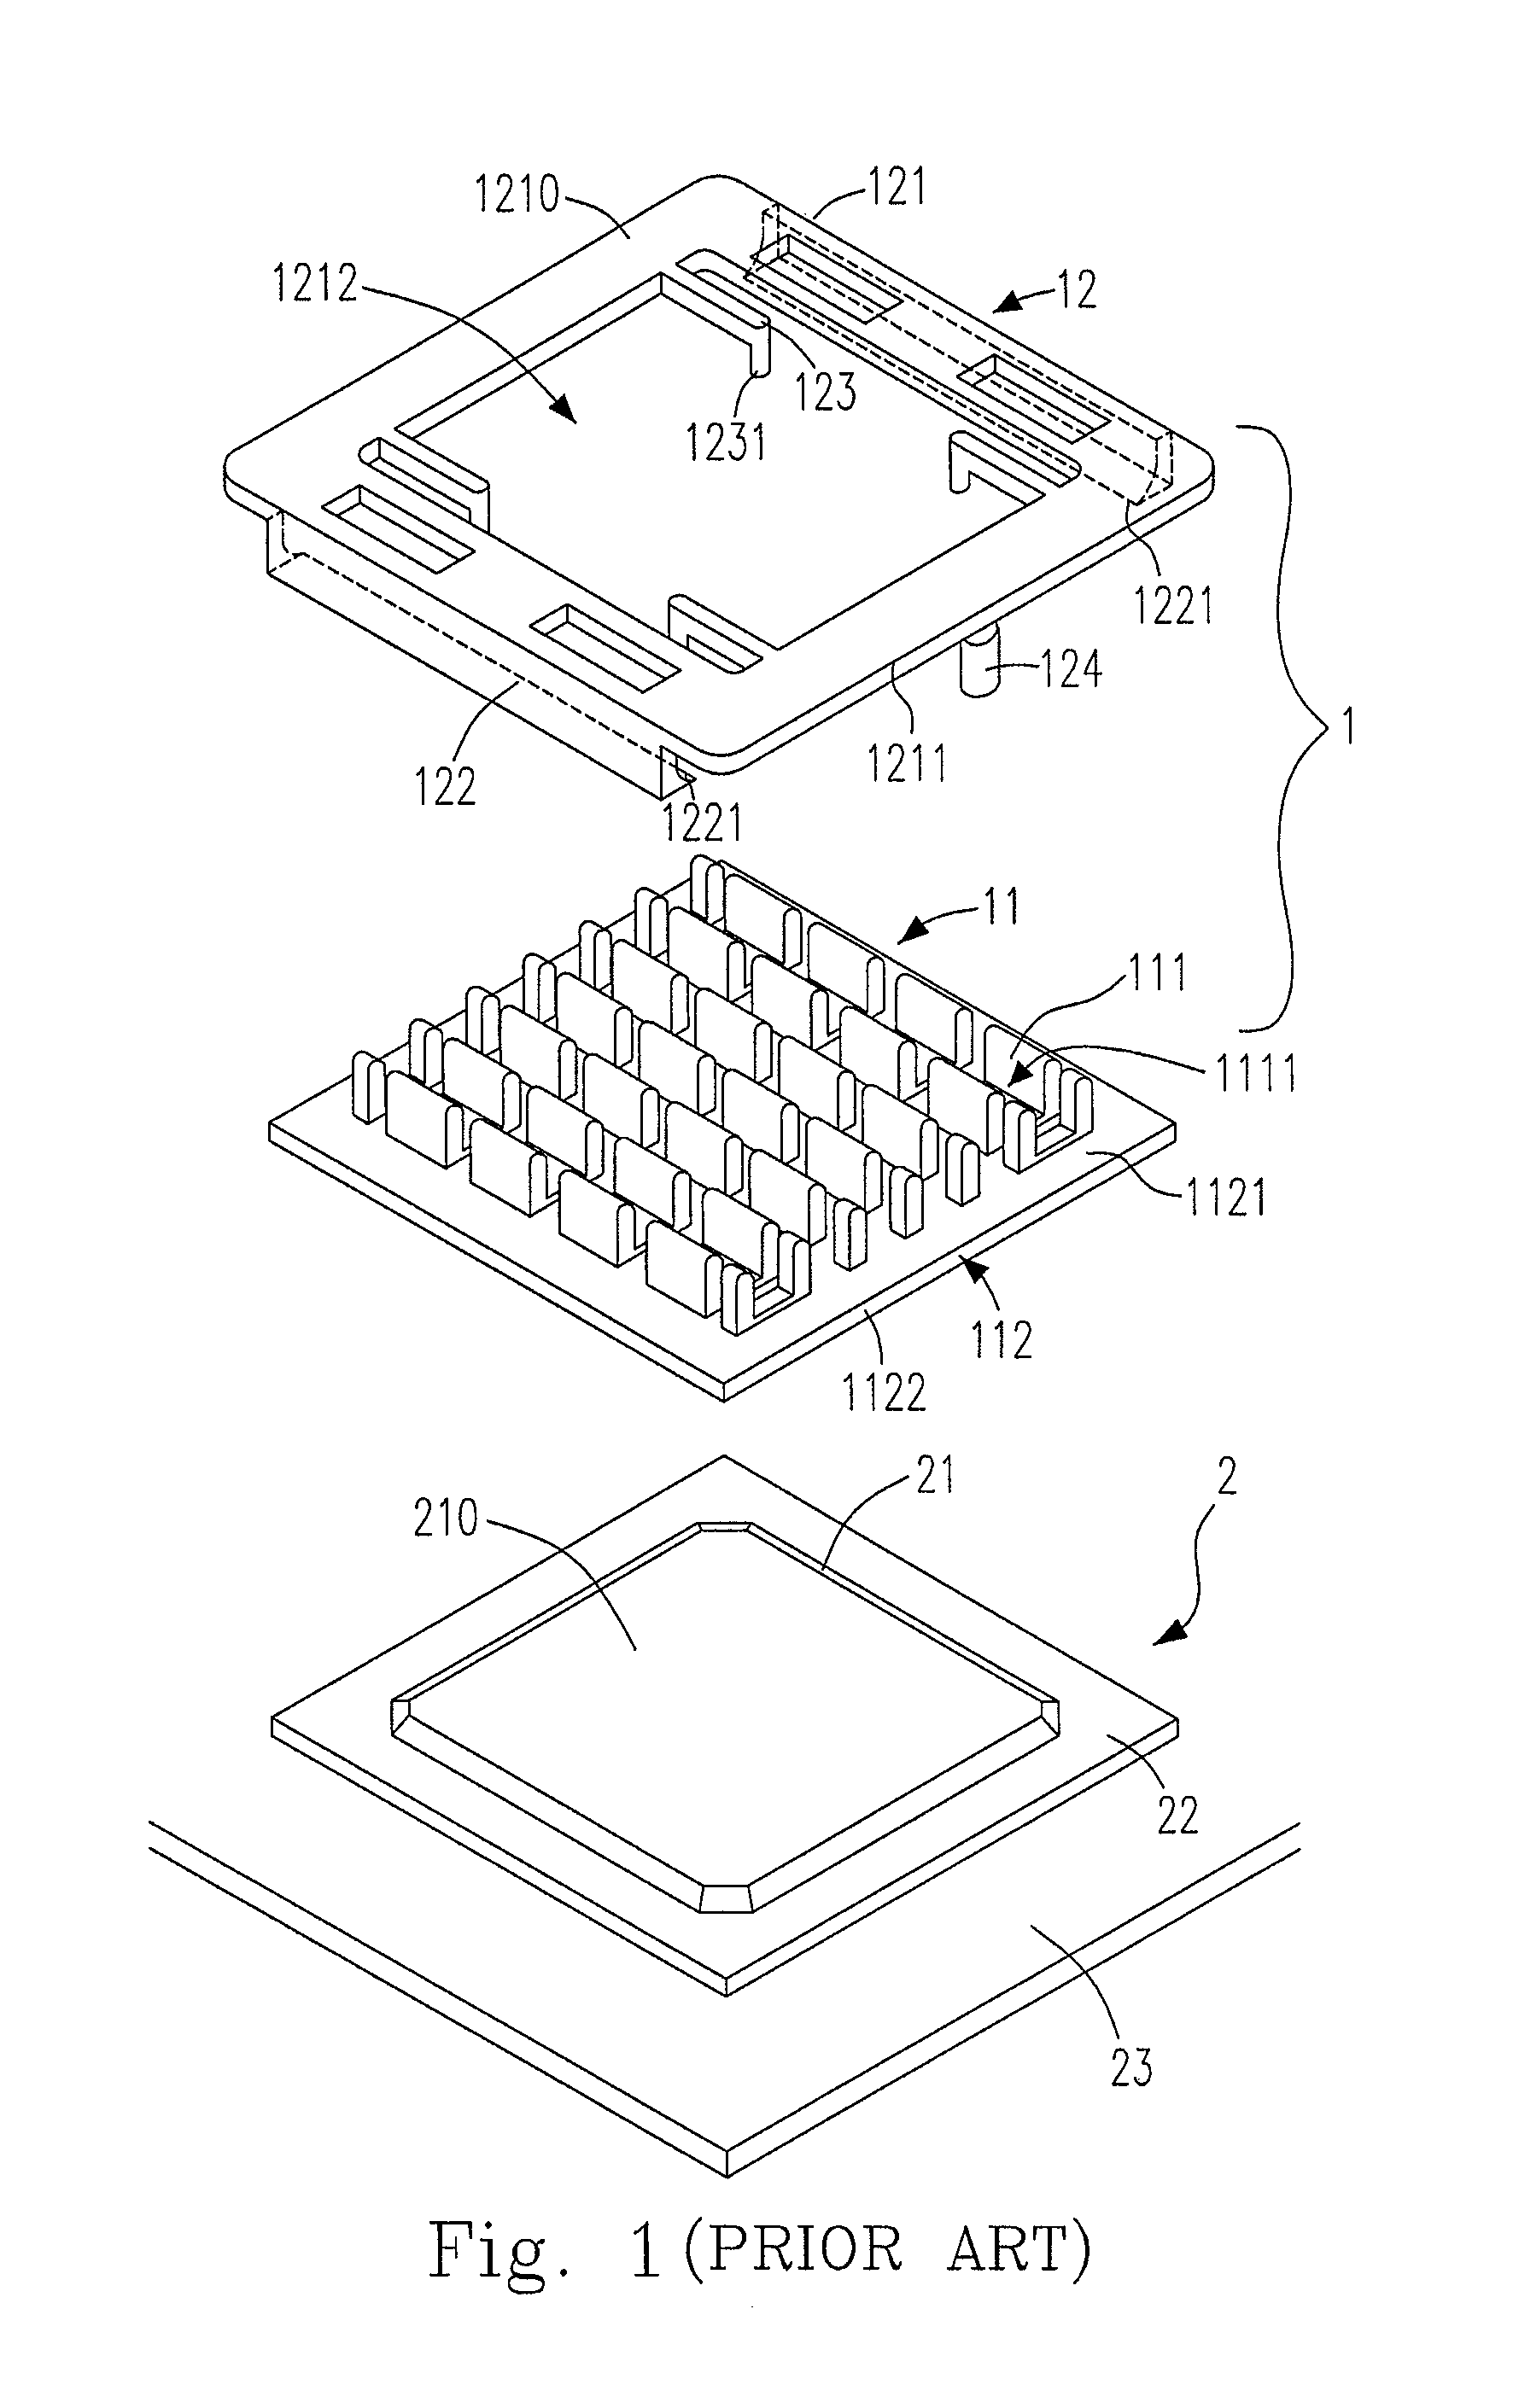 Heat sink assembly having retaining device with relatively better heat dissipation effectiveness